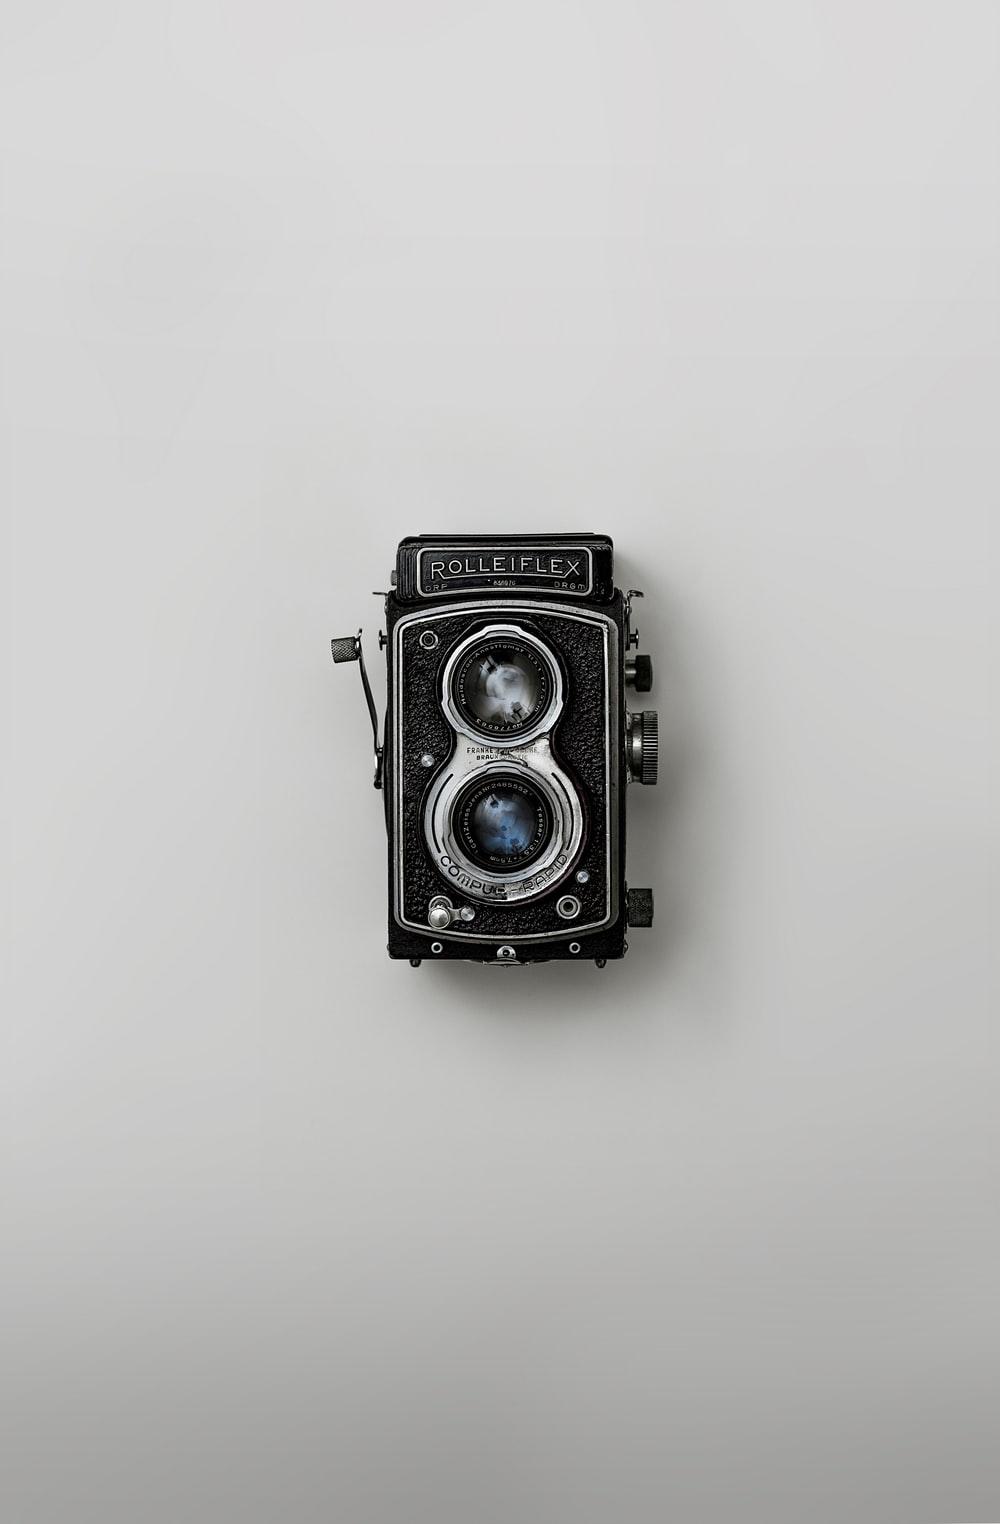 Rolleiflex Pictures Image